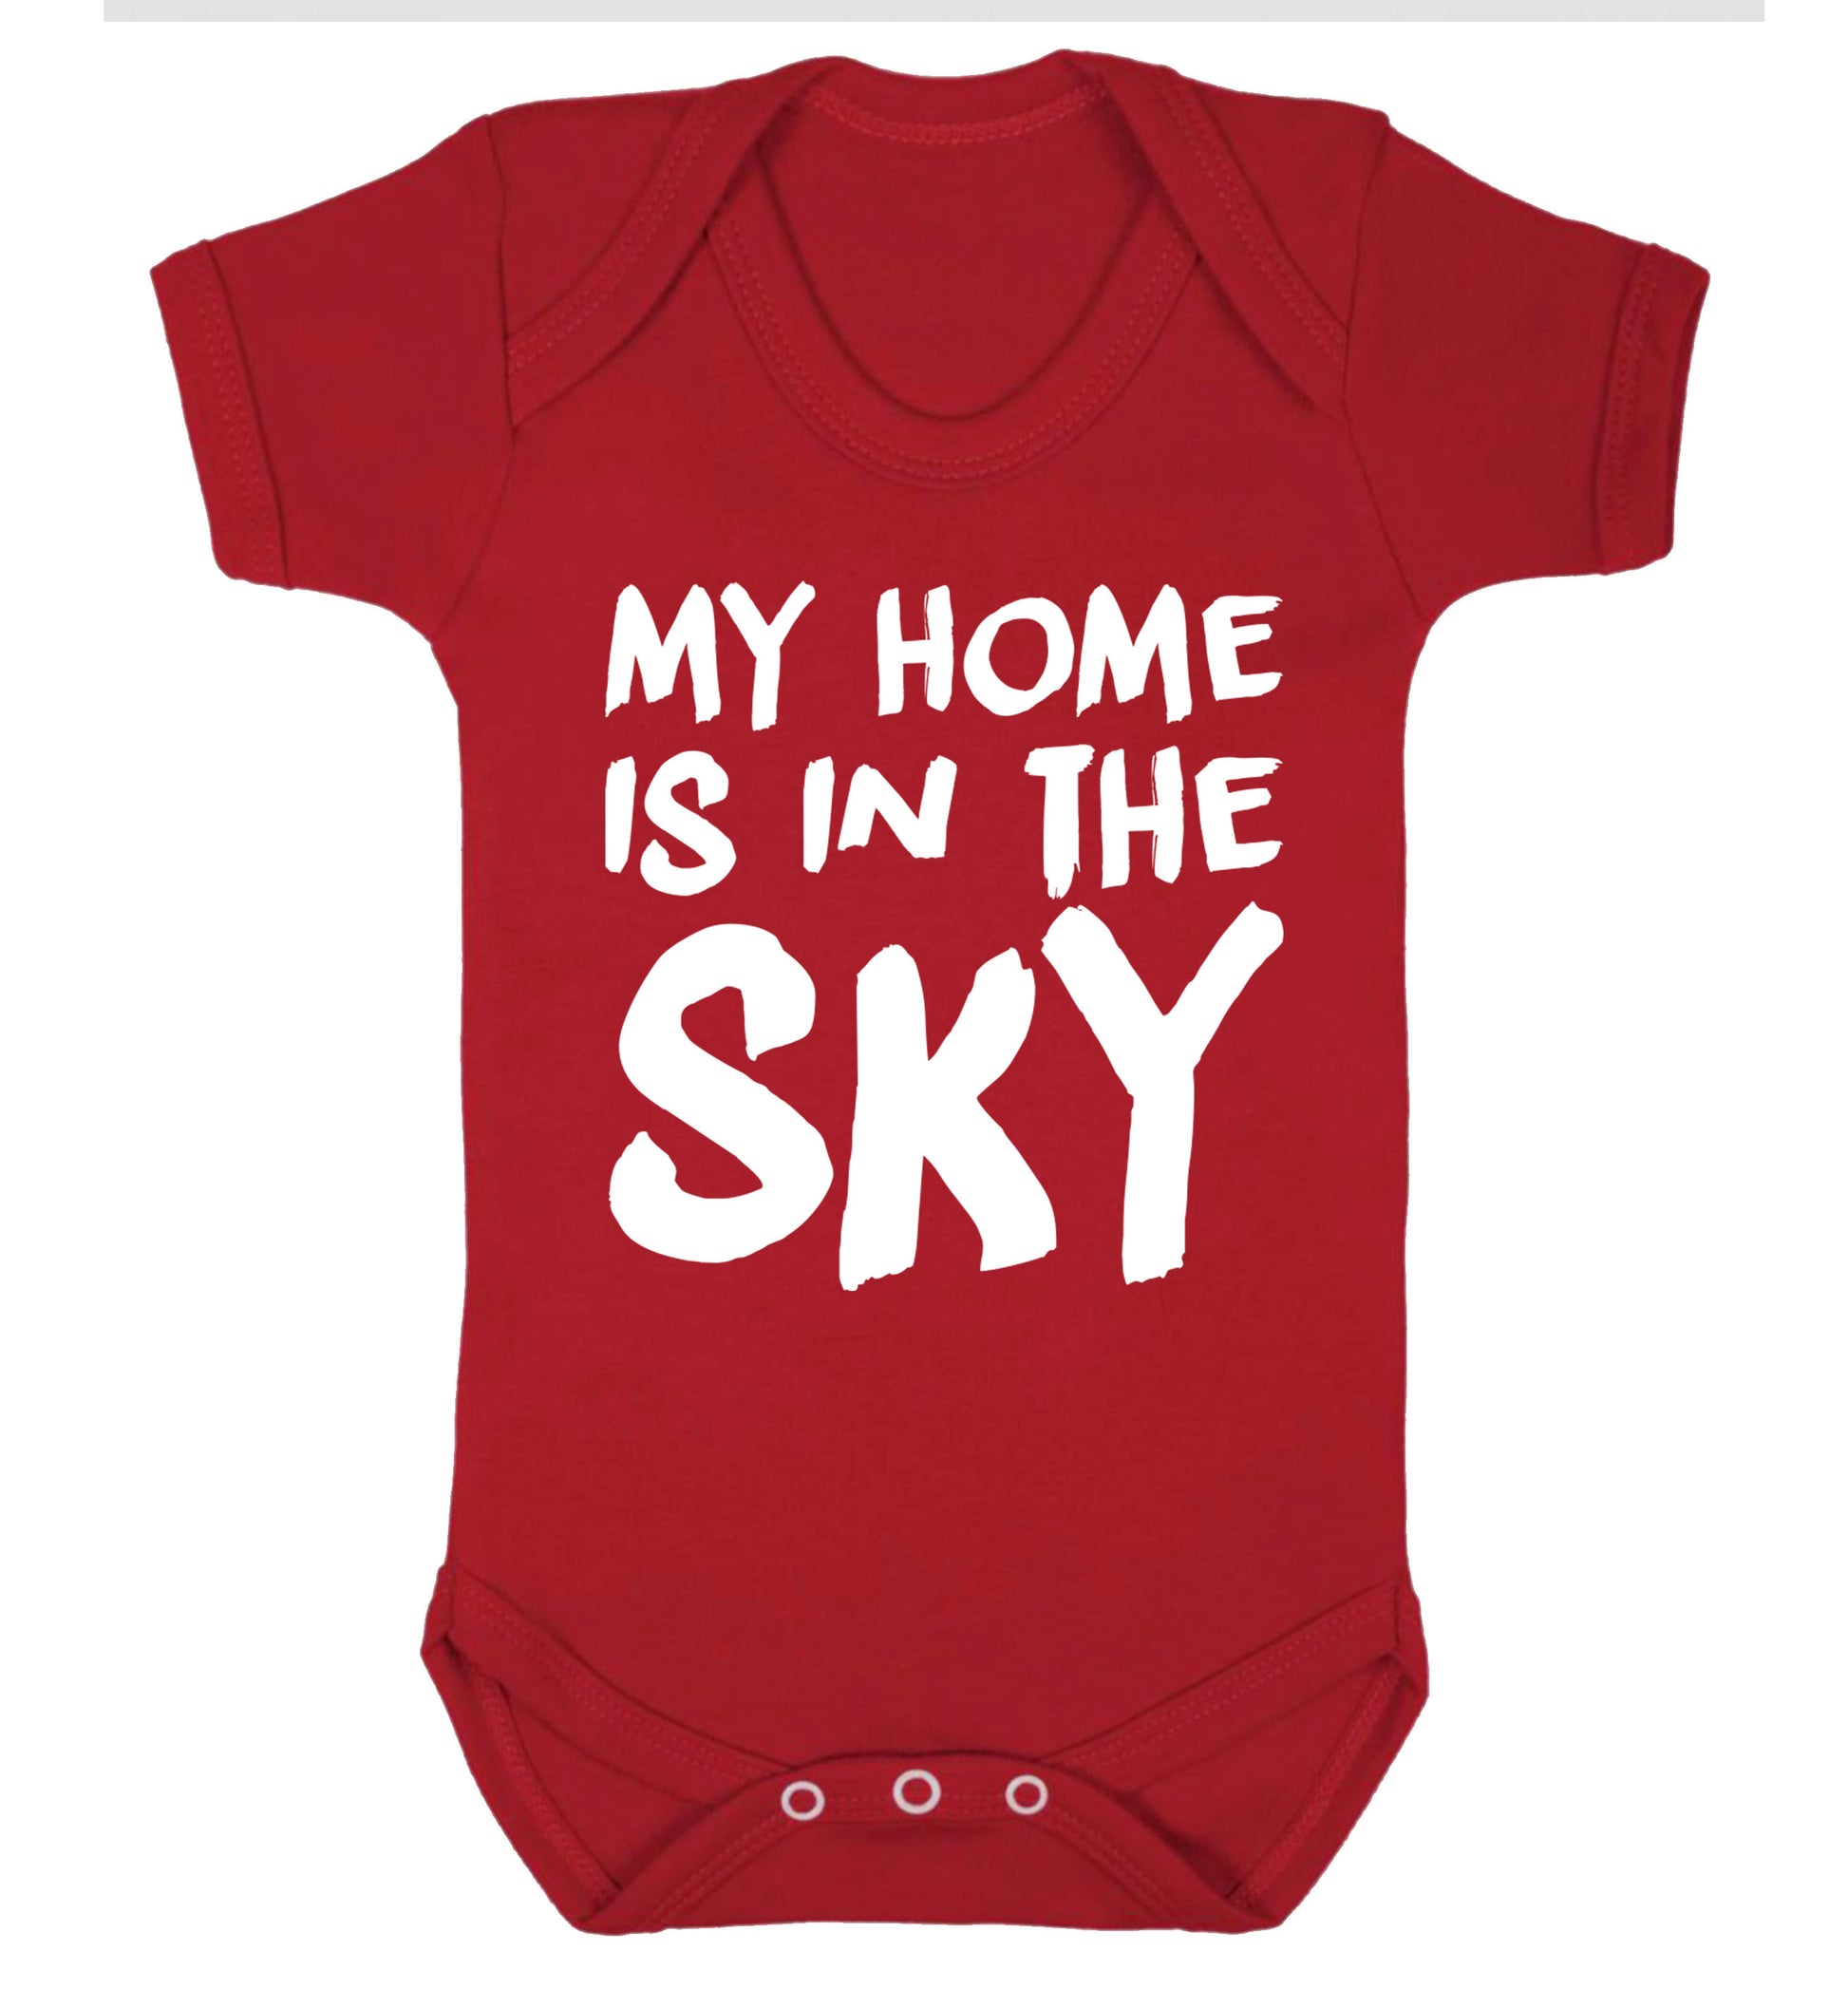 My home is in the sky Baby Vest red 18-24 months